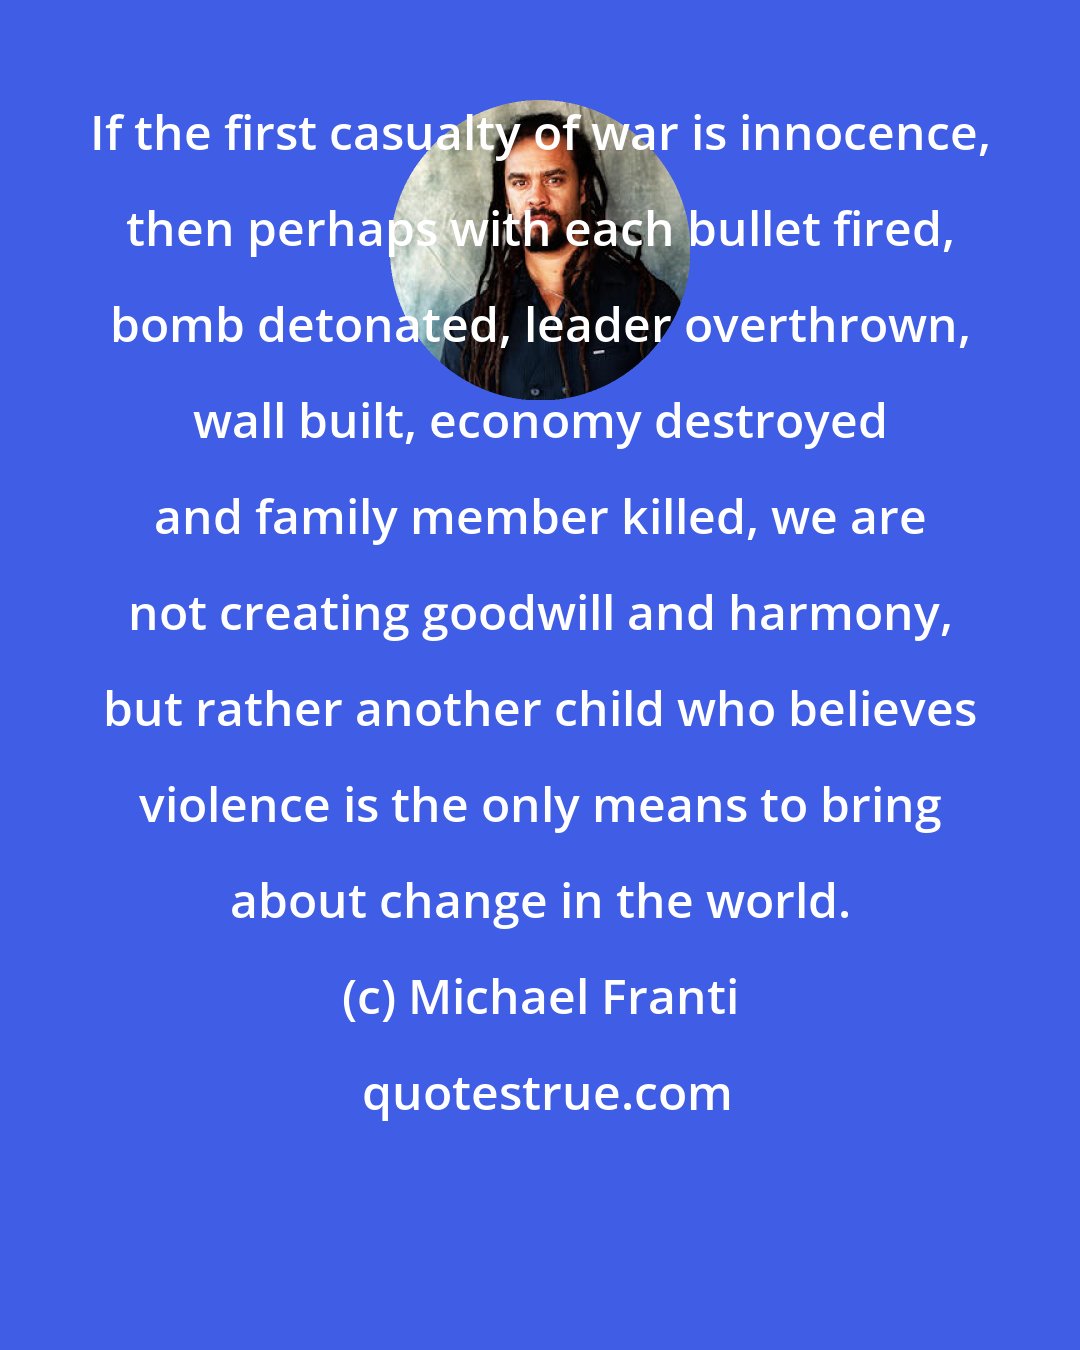 Michael Franti: If the first casualty of war is innocence, then perhaps with each bullet fired, bomb detonated, leader overthrown, wall built, economy destroyed and family member killed, we are not creating goodwill and harmony, but rather another child who believes violence is the only means to bring about change in the world.